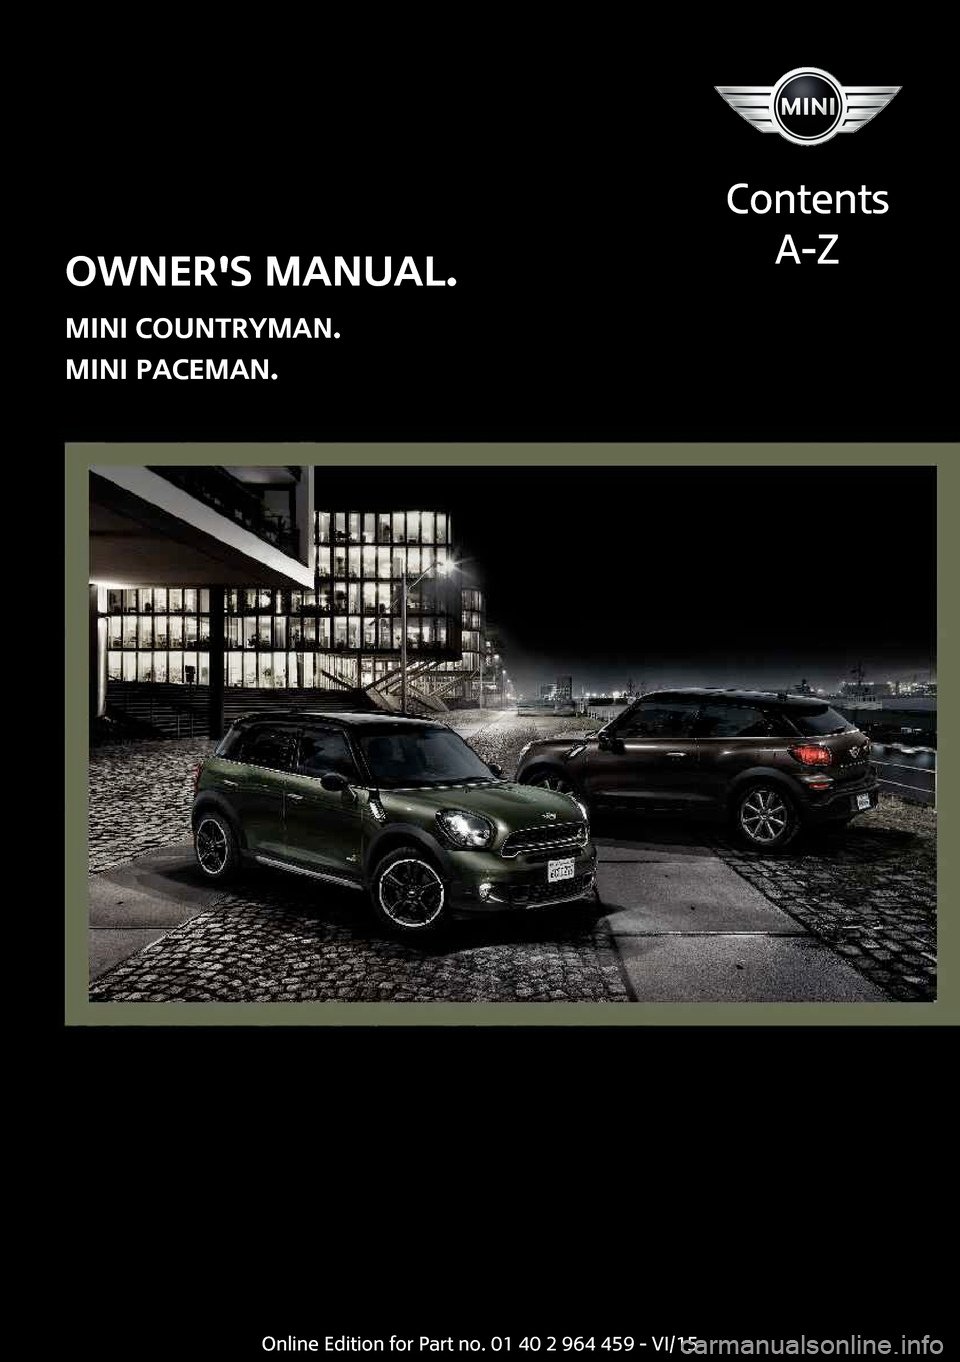 MINI Countryman 2016  Owners Manual (Mini Connected) OWNERS MANUAL.
MINI COUNTRYMAN.
MINI PACEMAN.
Contents
A-ZOnline Edition for Part no. 01 40 2 964 459 - VI/15  